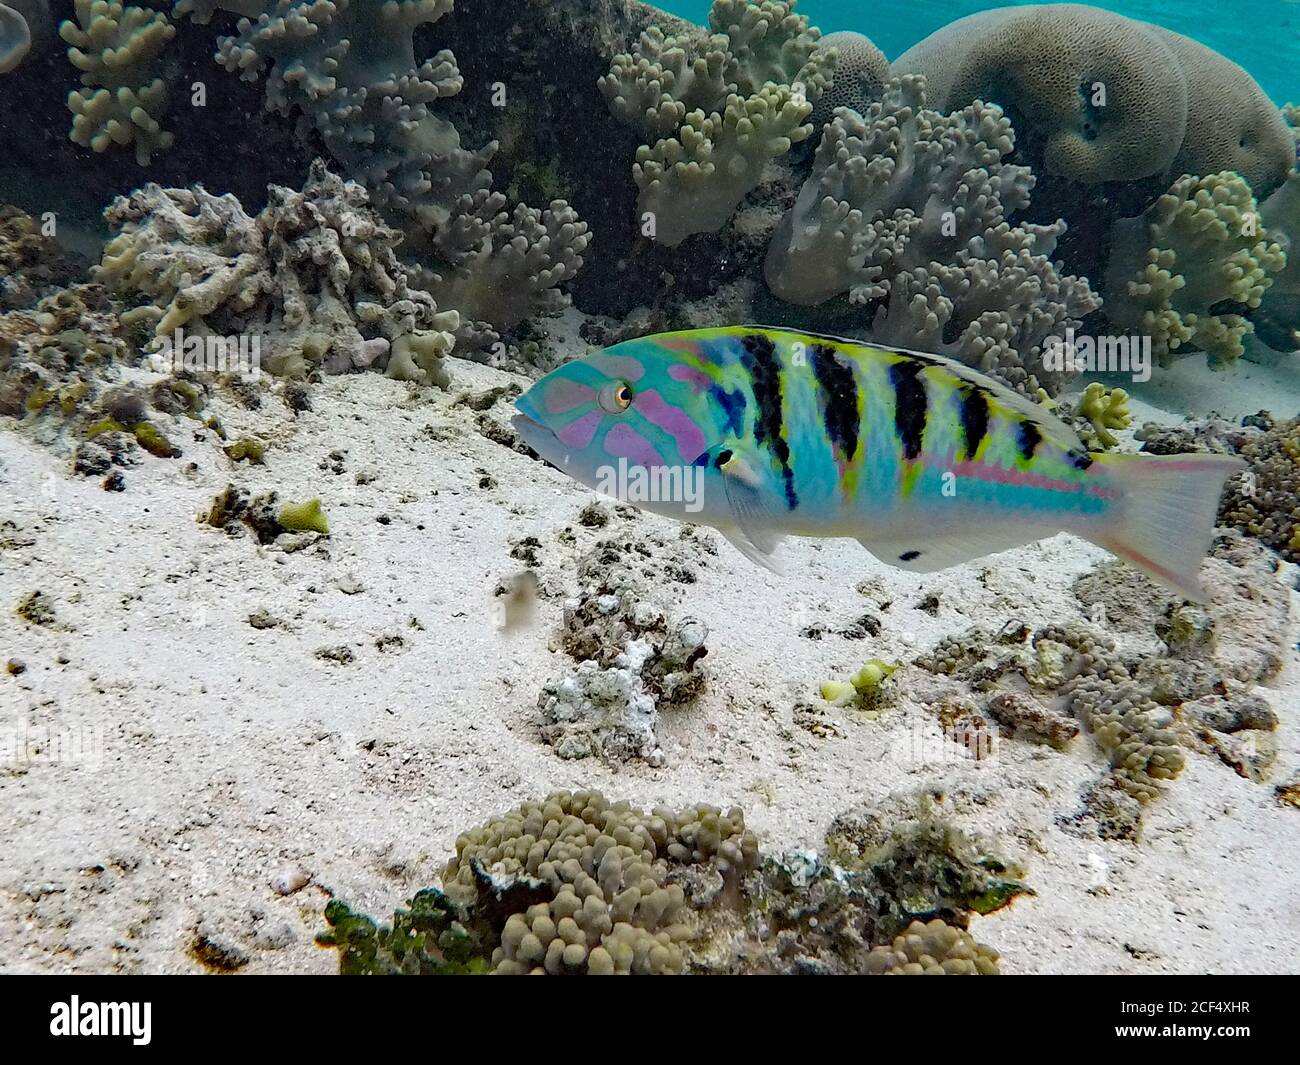 A colourful Sixbar Wrasse (Thalassoma hardwicke) swims around a coral reef in the water surrounding Mystery island, Vanuatu in the South Pacific Ocean Stock Photo